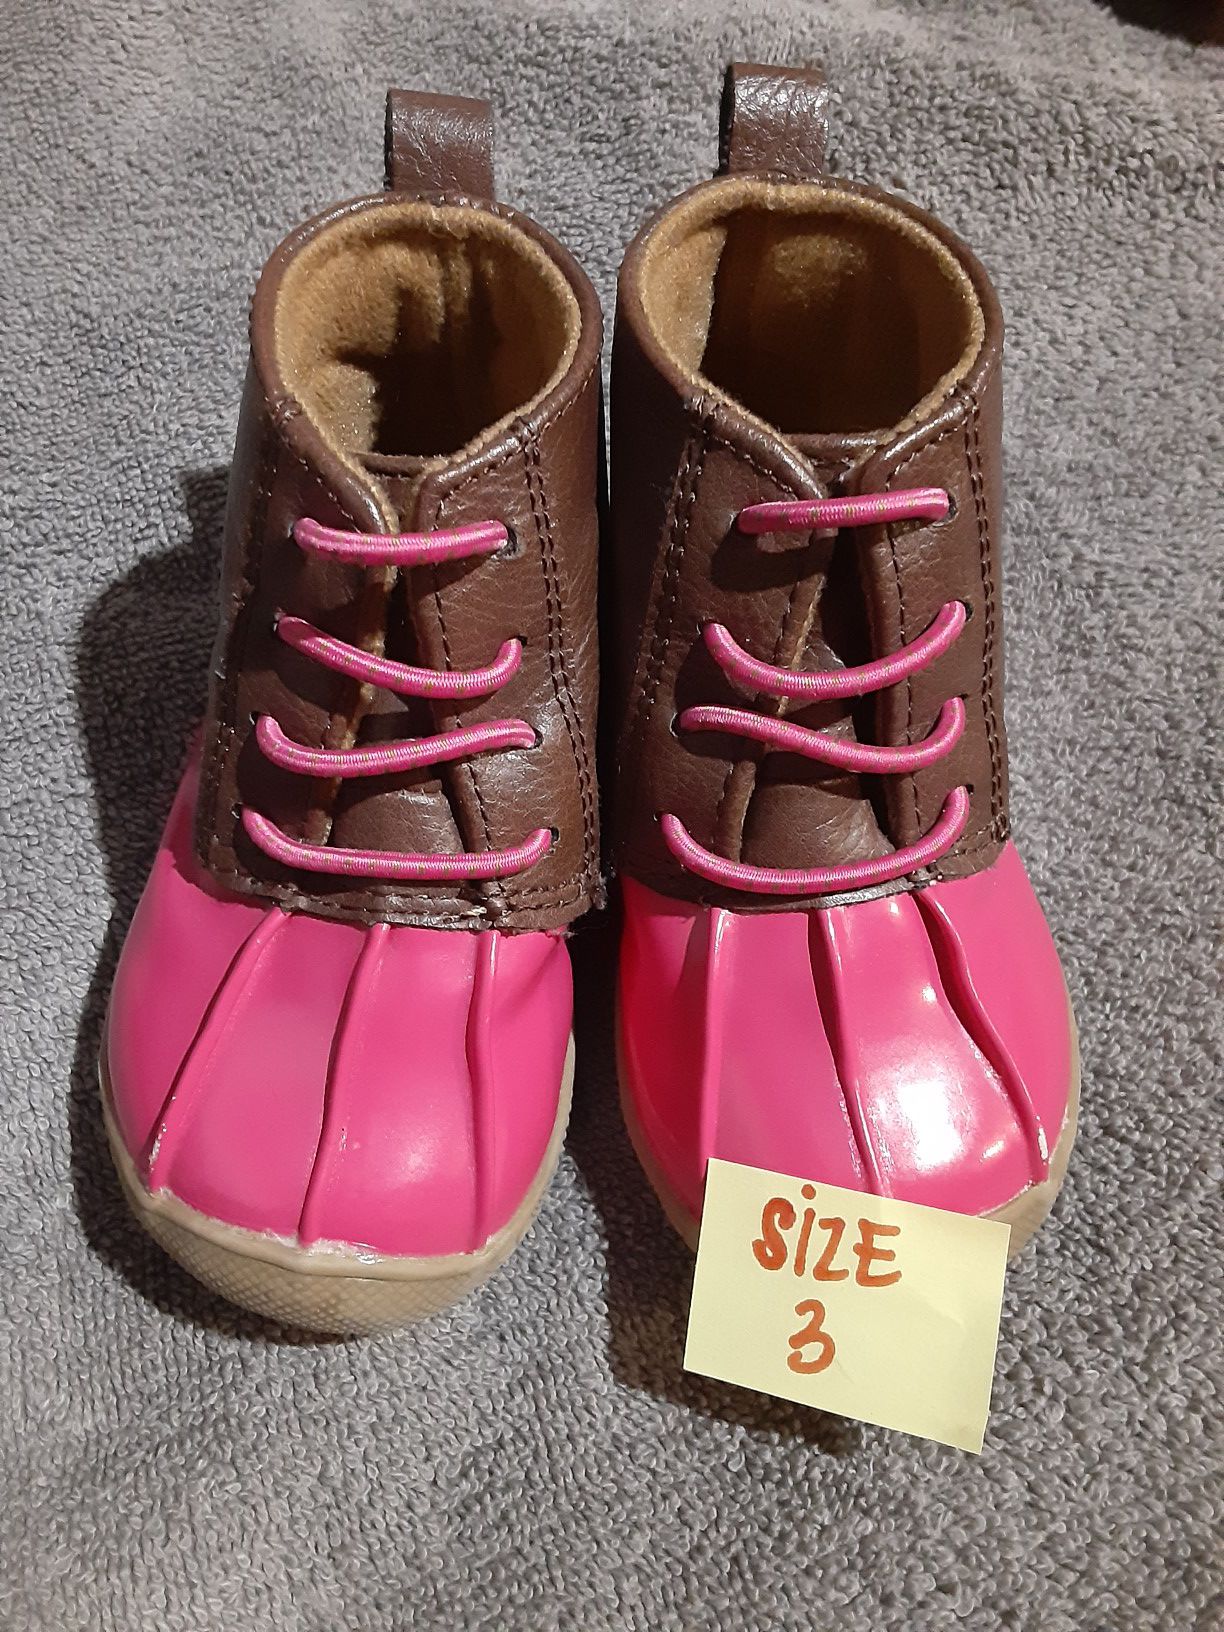 Toddler macys snow boots use only one time !